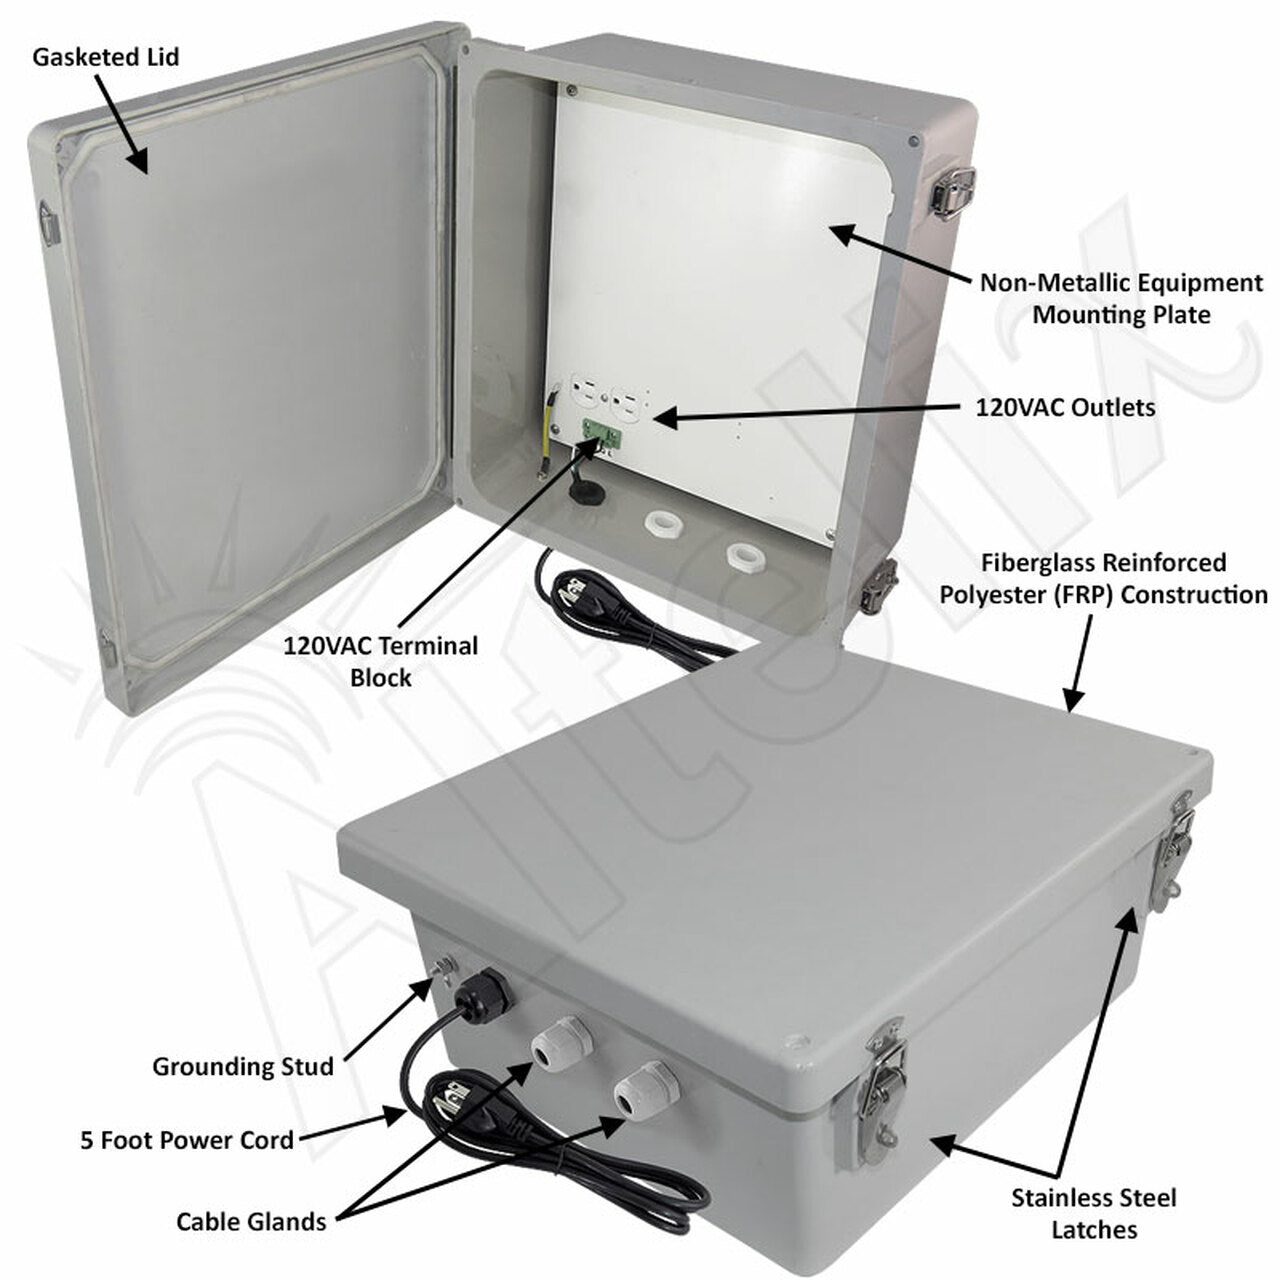 Altelix Fiberglass Weatherproof WiFi NEMA 4X Enclosure with Polyester Mounting Plate, 120 VAC Outlets & Power Cord - 0